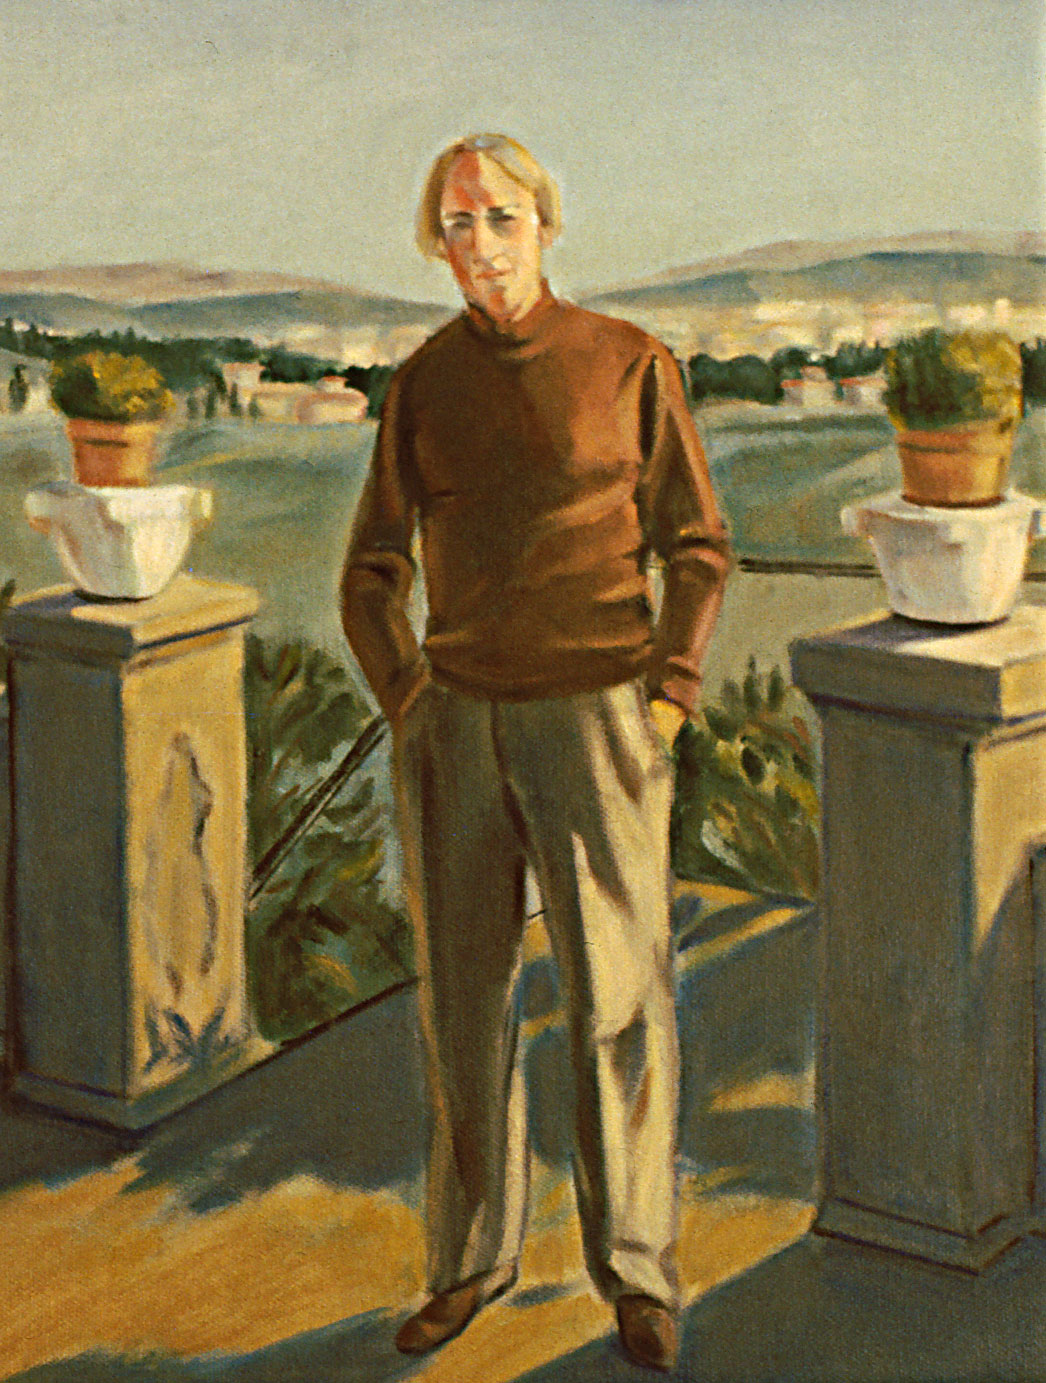 Thumbnail of Seymour in Fiesole: by Ethel Fisher, 1995, oil on canvas, 14 x 11 inches, twentieth century portrait painting.